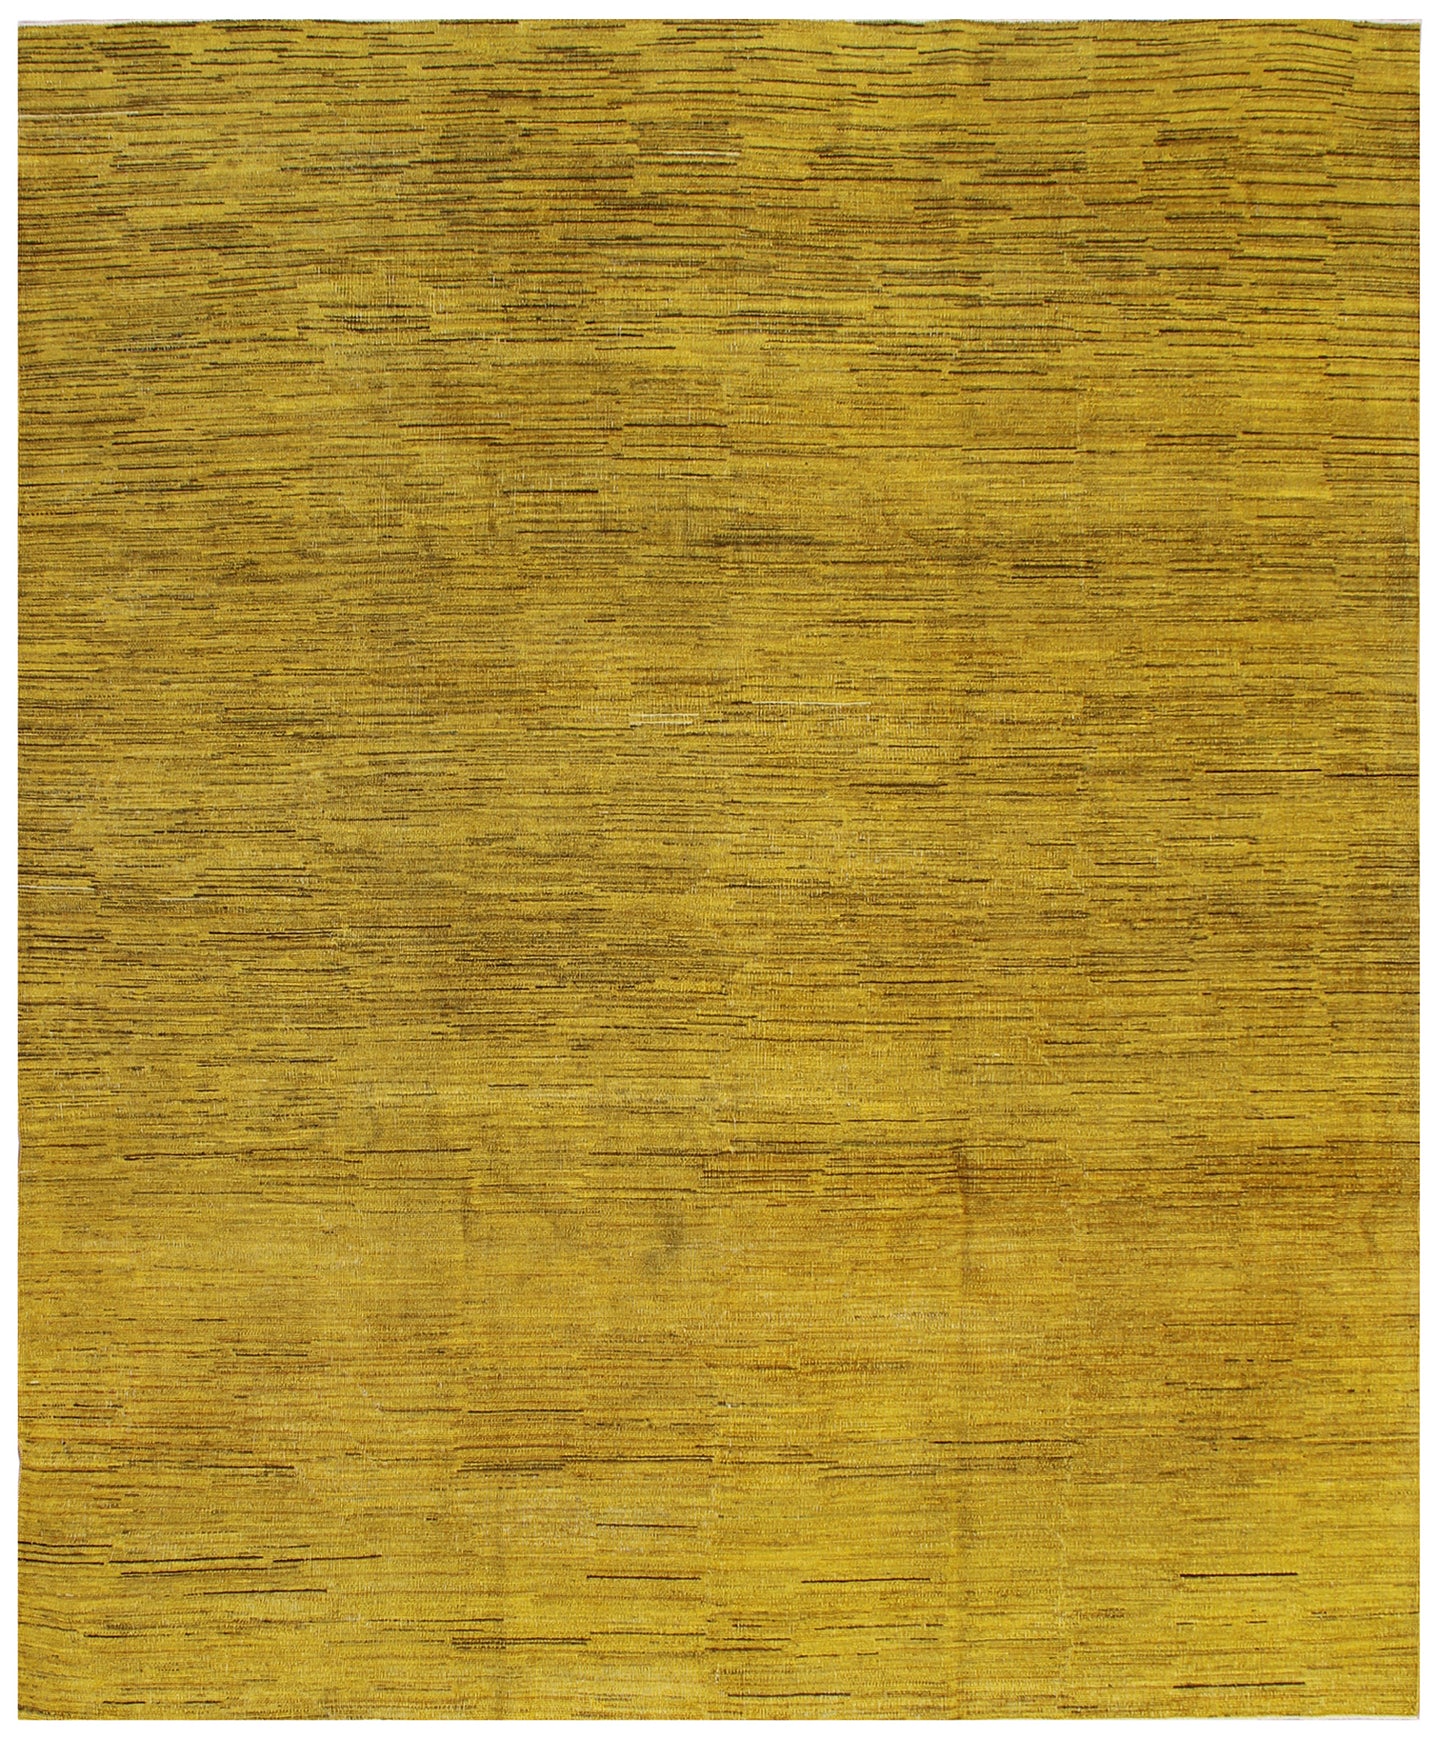 8'x10' Solid Gold and Brown Stria Design Ariana Over-dyed Hand-Knotted Area Rug